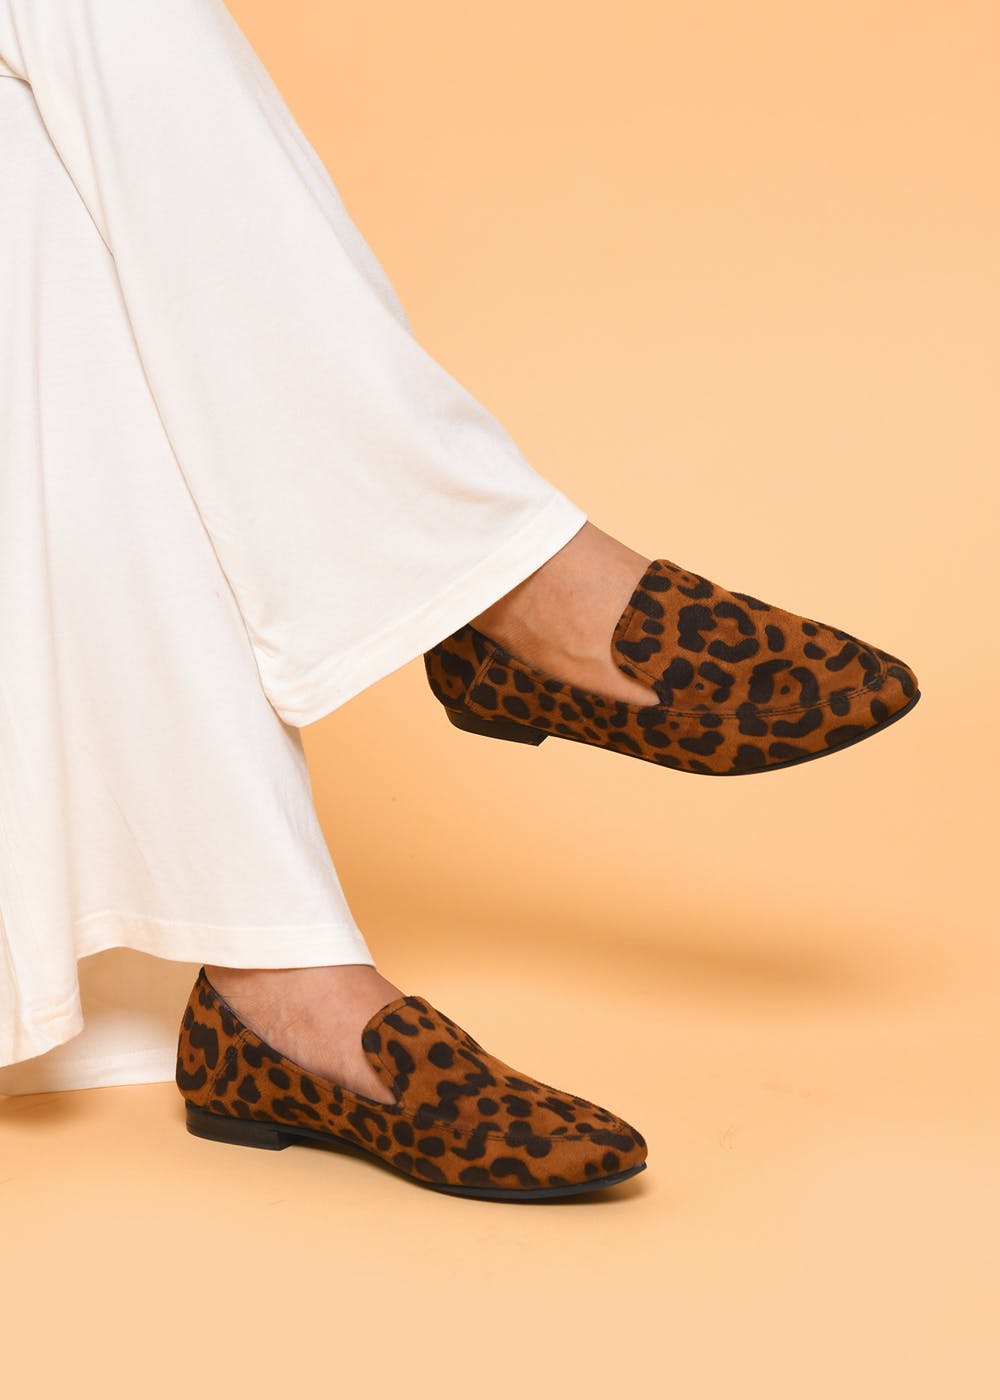 Get Brown Animal Printed Loafers at ₹ 1399 | LBB Shop